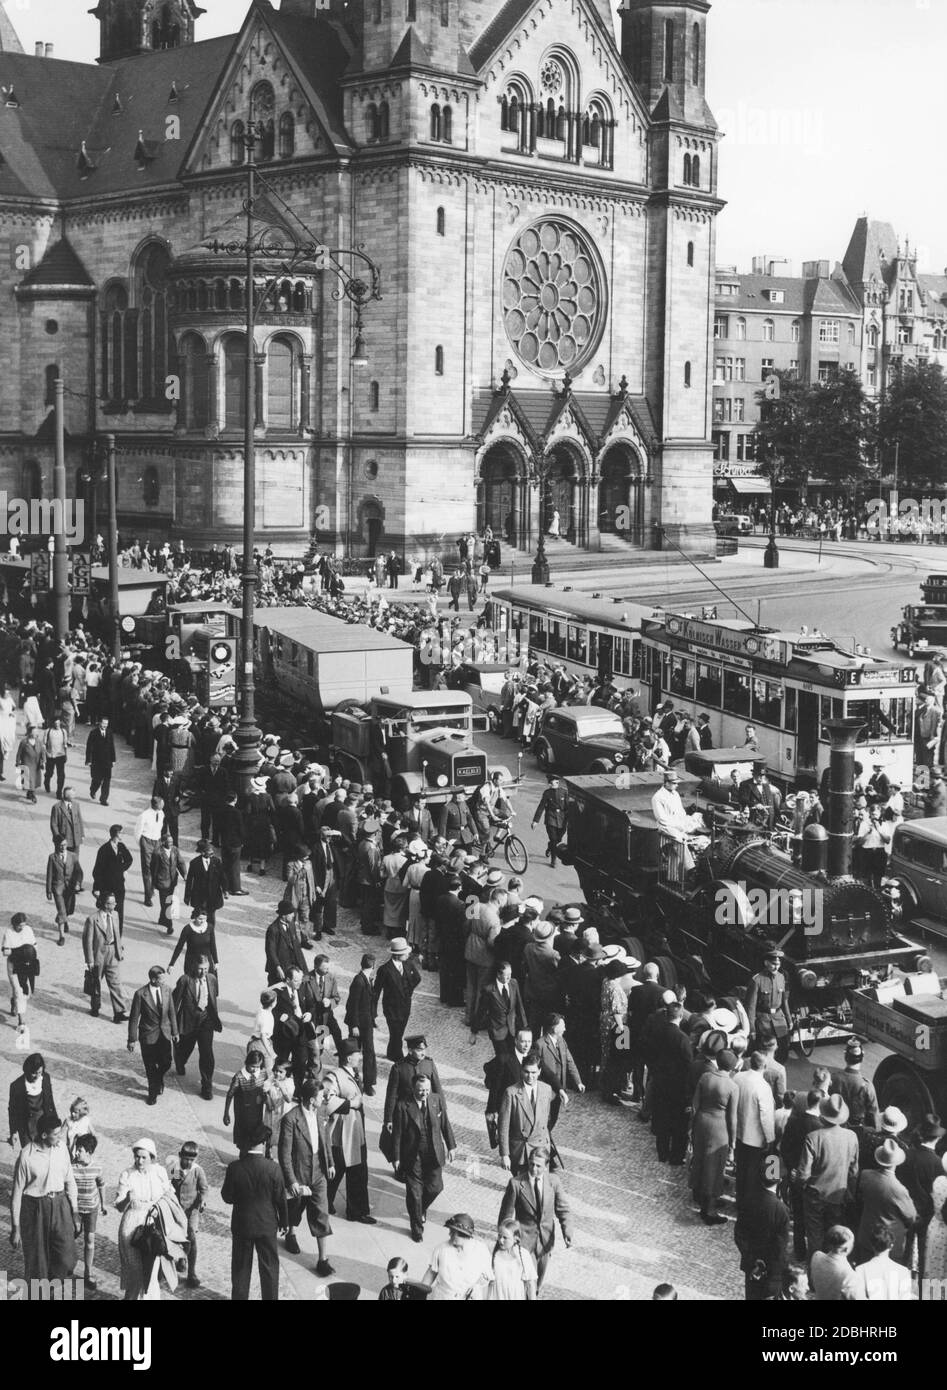 'The replica of the first German train ''Adler'' (locomotive and wagons) was pulled through Berlin to the exhibition grounds on Kaiserdamm on July 11, 1936. There it then drew visitors to the ''Deutschland'' exhibition through the open-air grounds. In this photo, the Deutsche Reichsbahn truck convoy is driving straight from Budapester Strasse to Hardenbergstrasse, passing the Kaiser Wilhelm Memorial Church, watched by spectators at the side of the road. Advertisements for ''AGB Stoffe'' and ''BMW'' hang on the lampposts.' Stock Photo